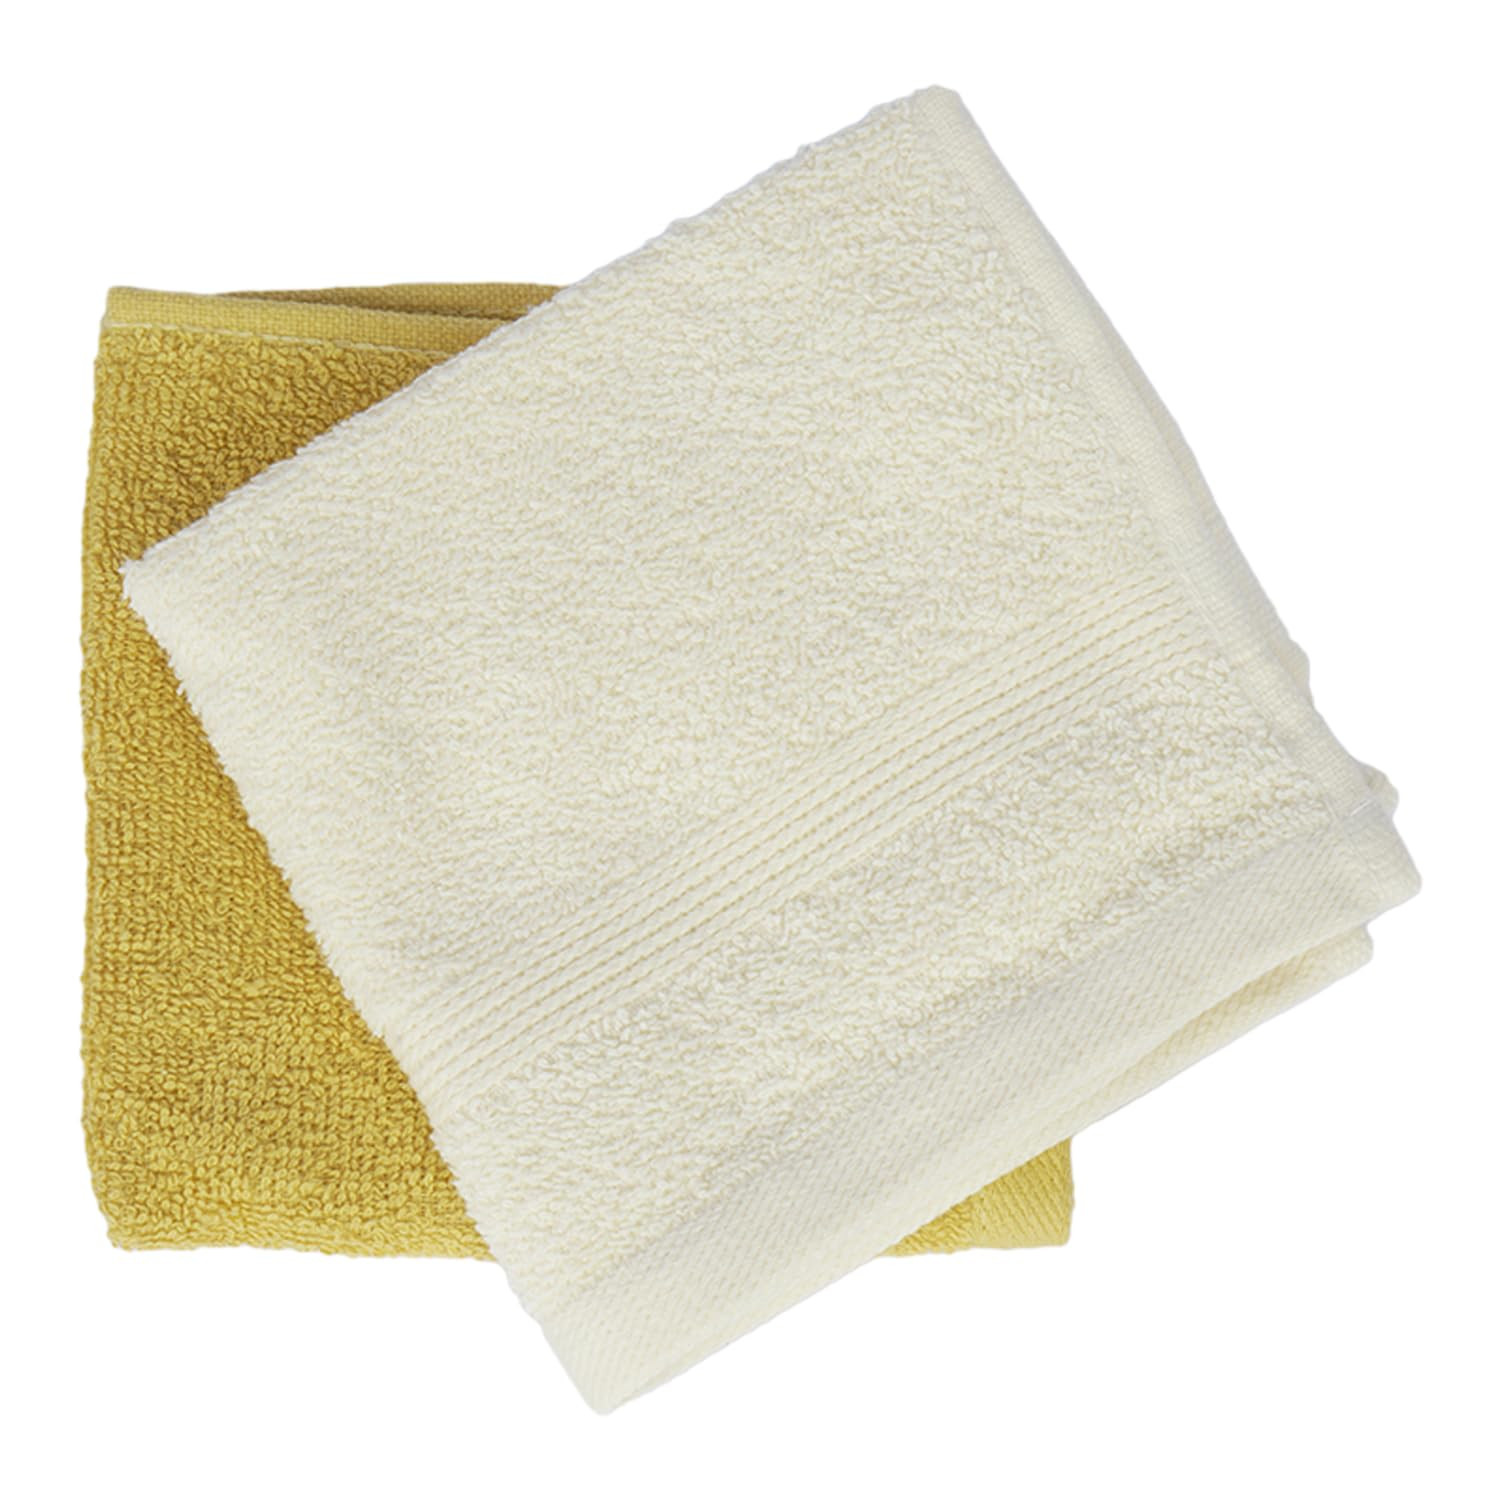 Kuber Industries 525 GSM Cotton Face towels |Super Soft, Quick Absorbent & Anti-Bacterial|Gym & Workout Towels|Pack of 2 (Mustrad & Ivory)